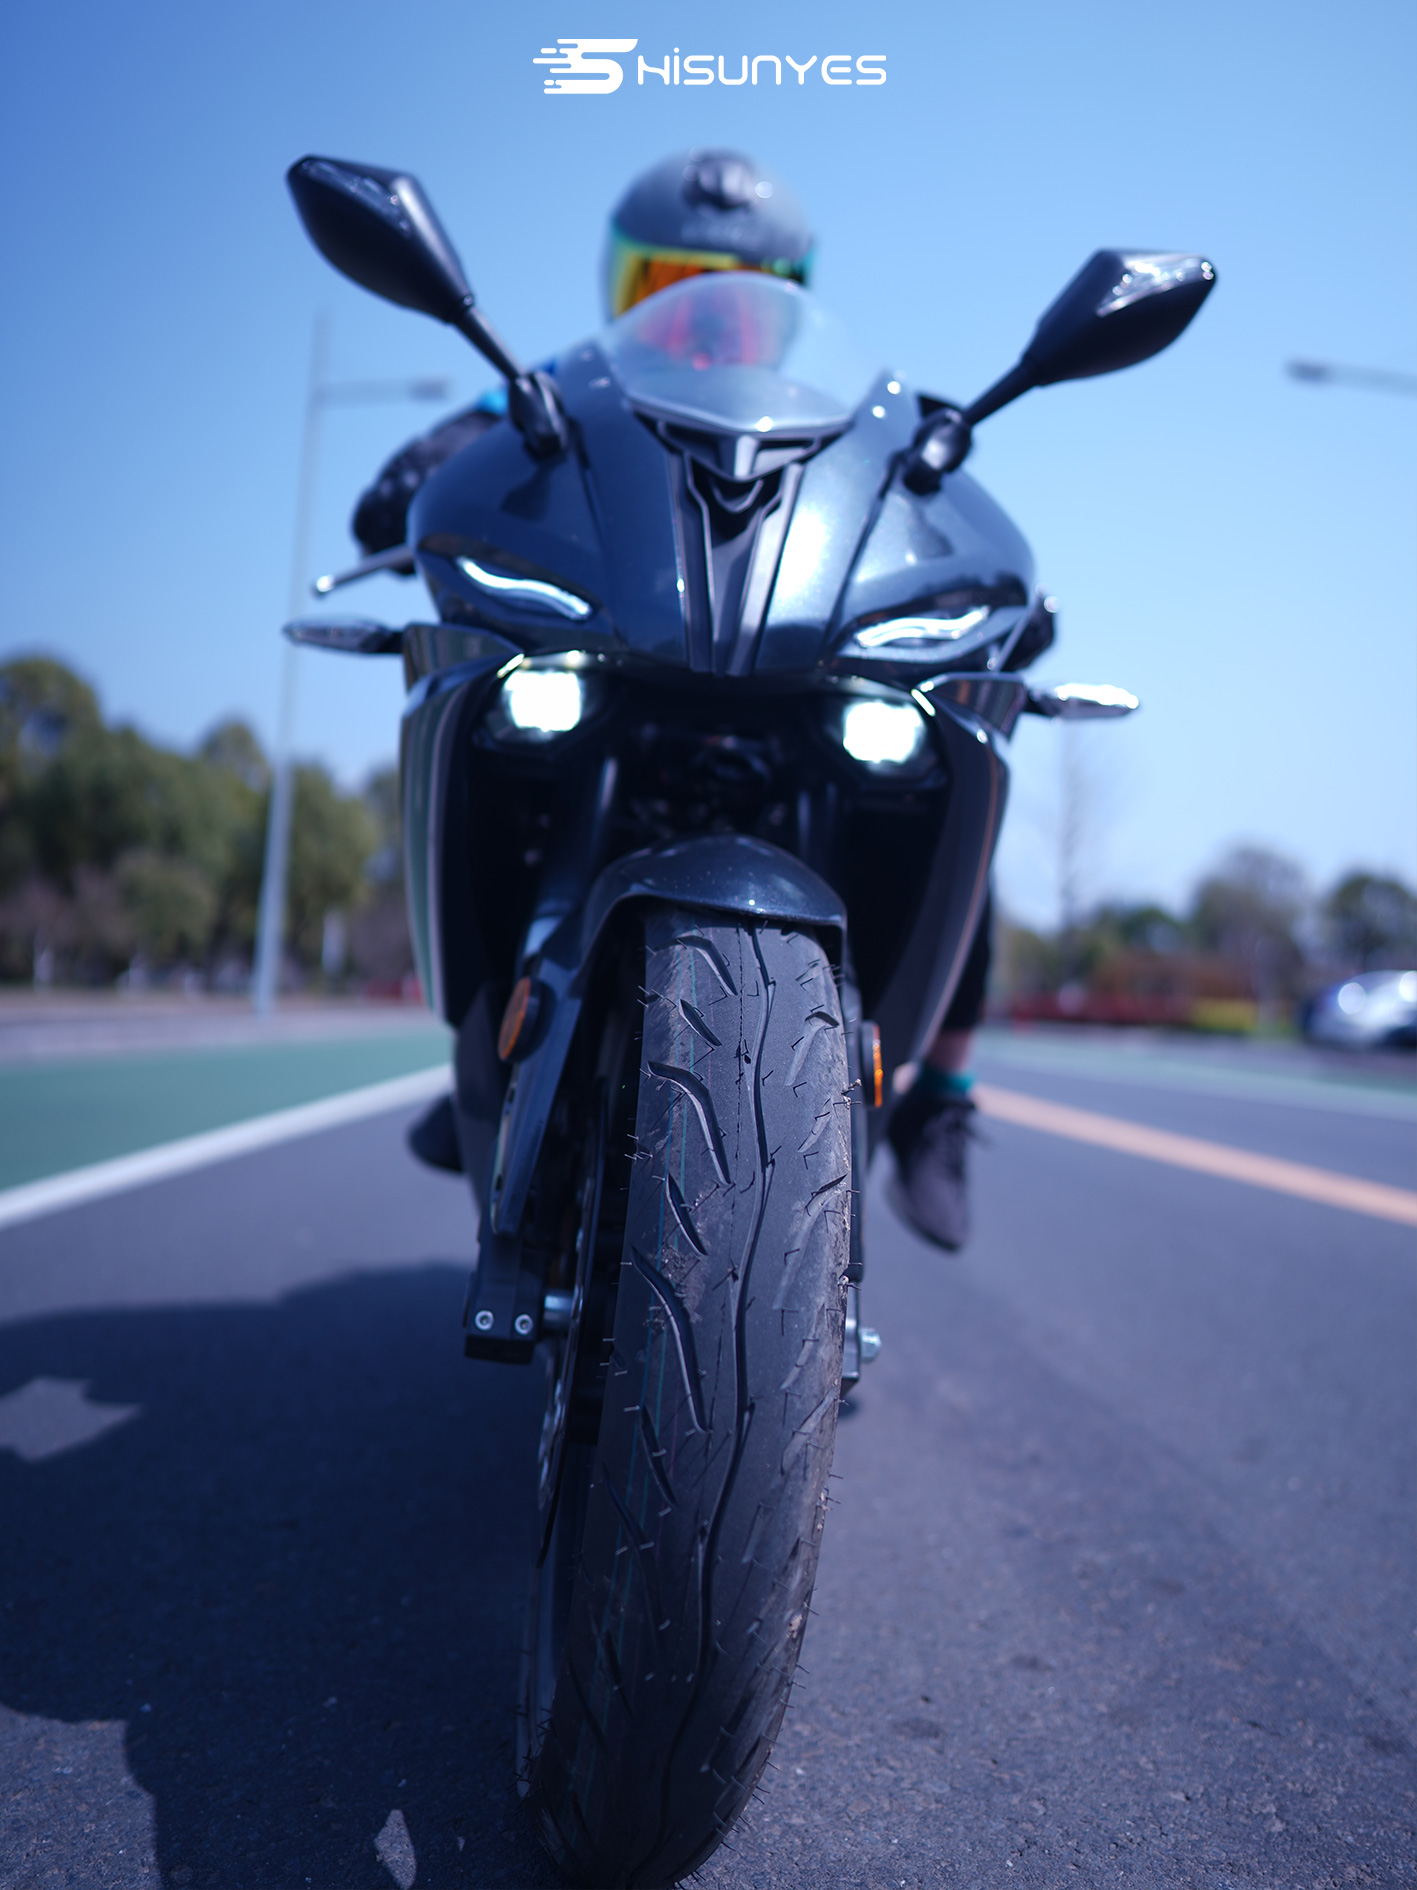 The electric motorcycle V5